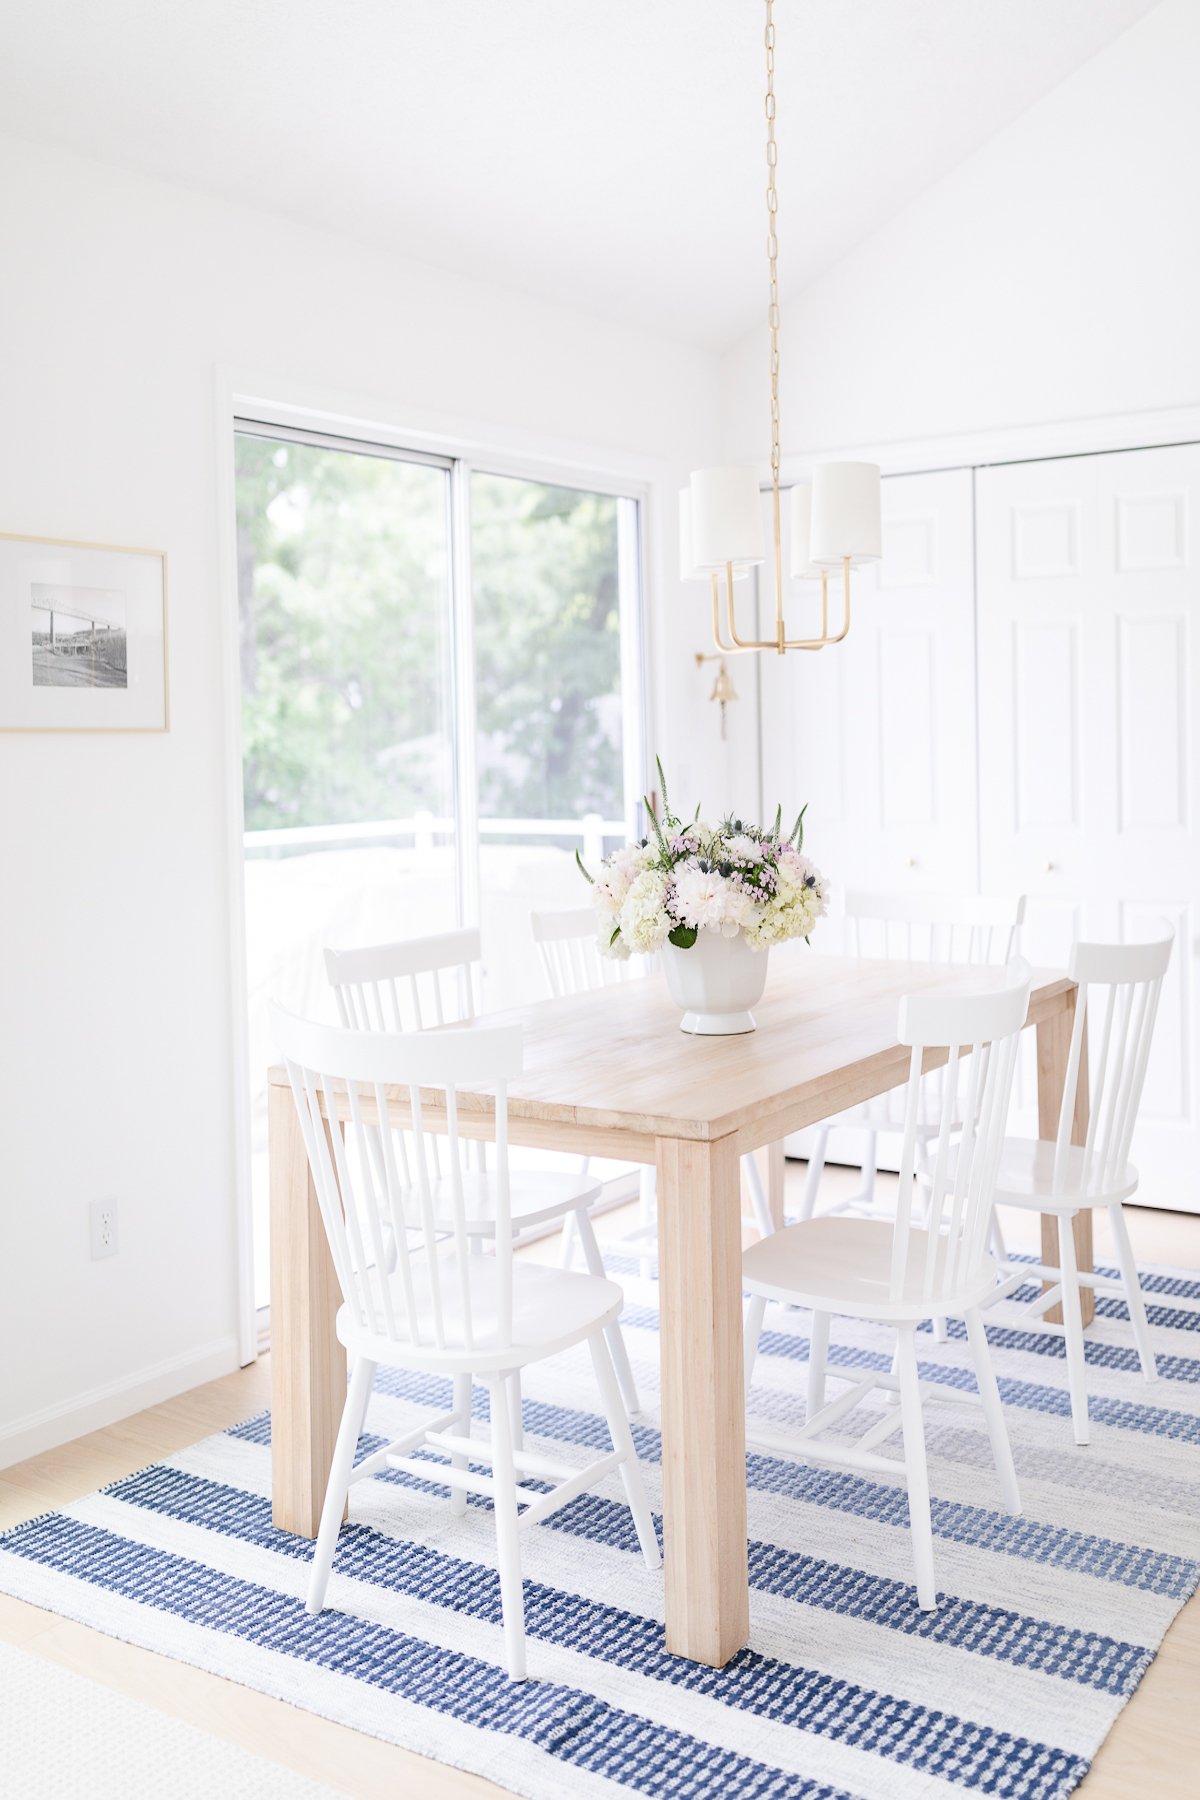 A small dining room table with white chairs and a vase of flowers.